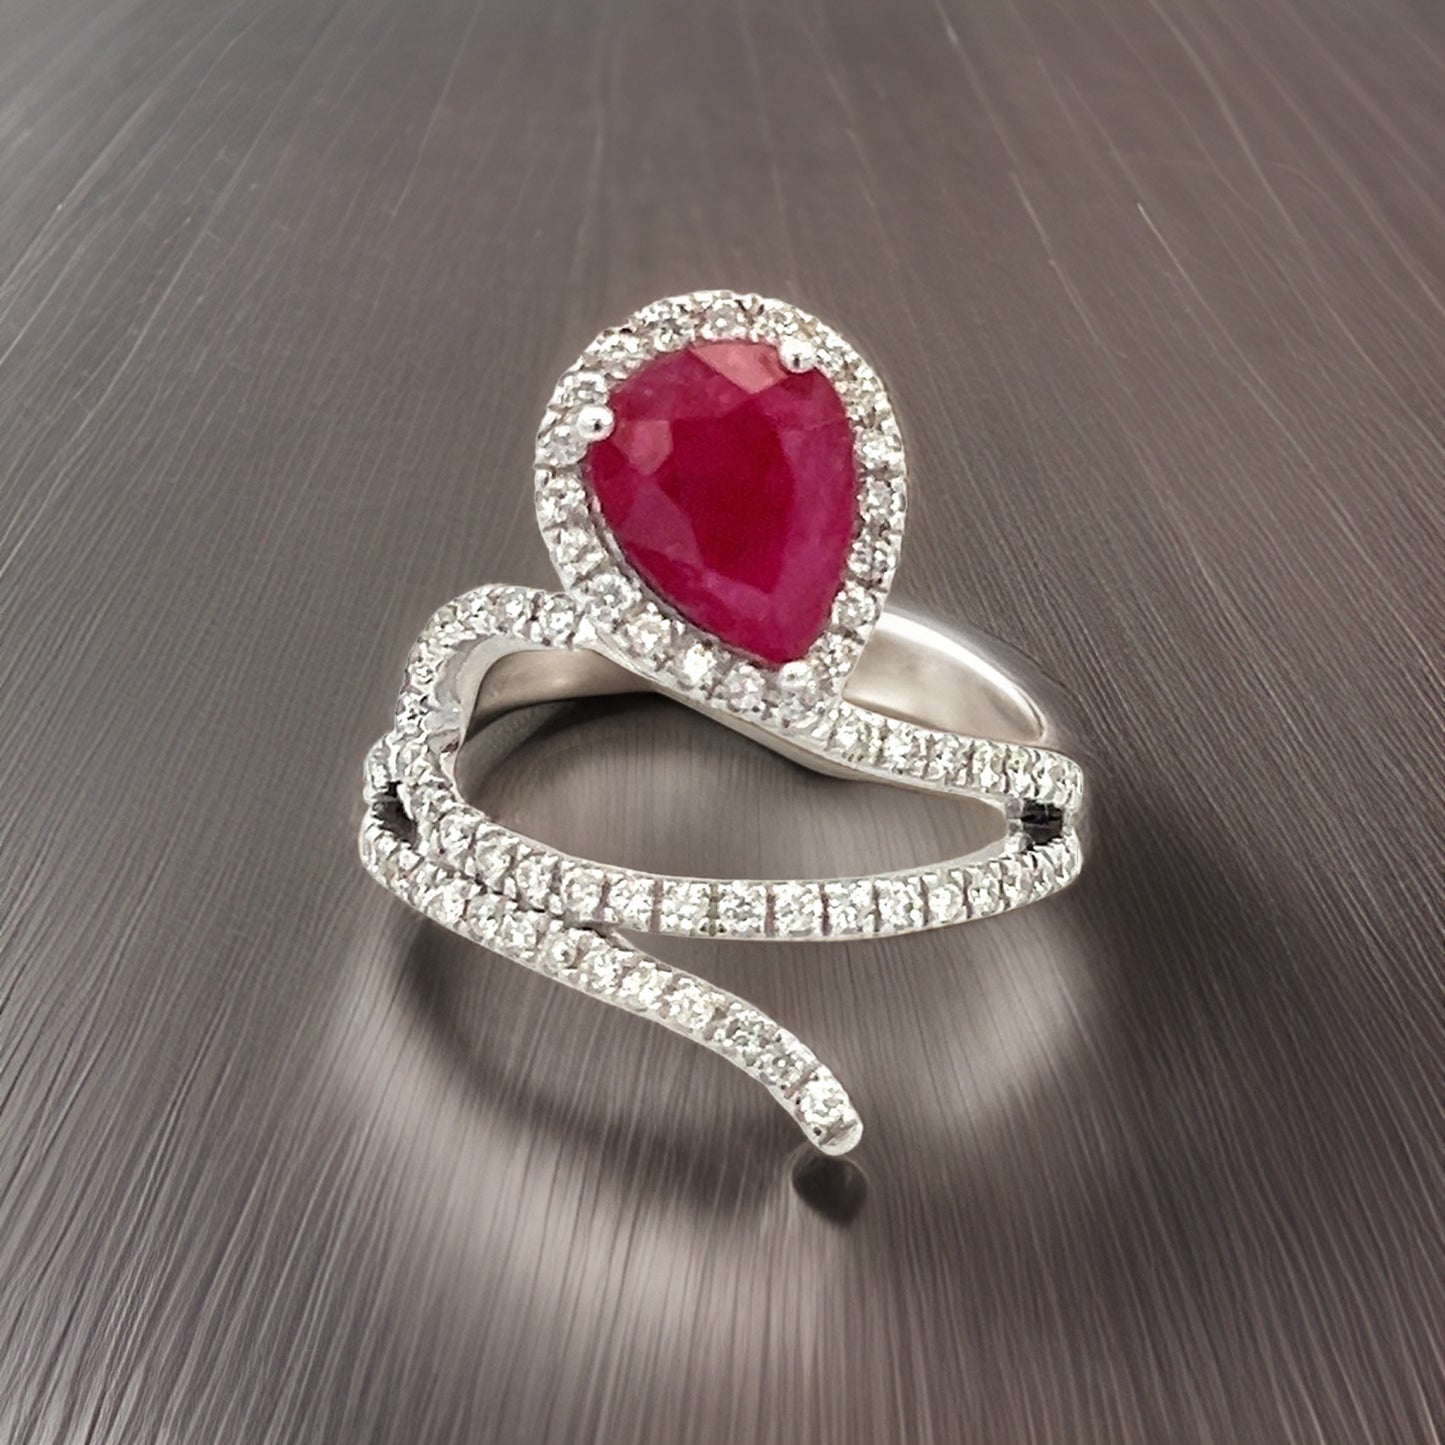 Natural Ruby Diamond Ring 6.75 14k W Gold 2.32 TCW Certified $5,950 310542